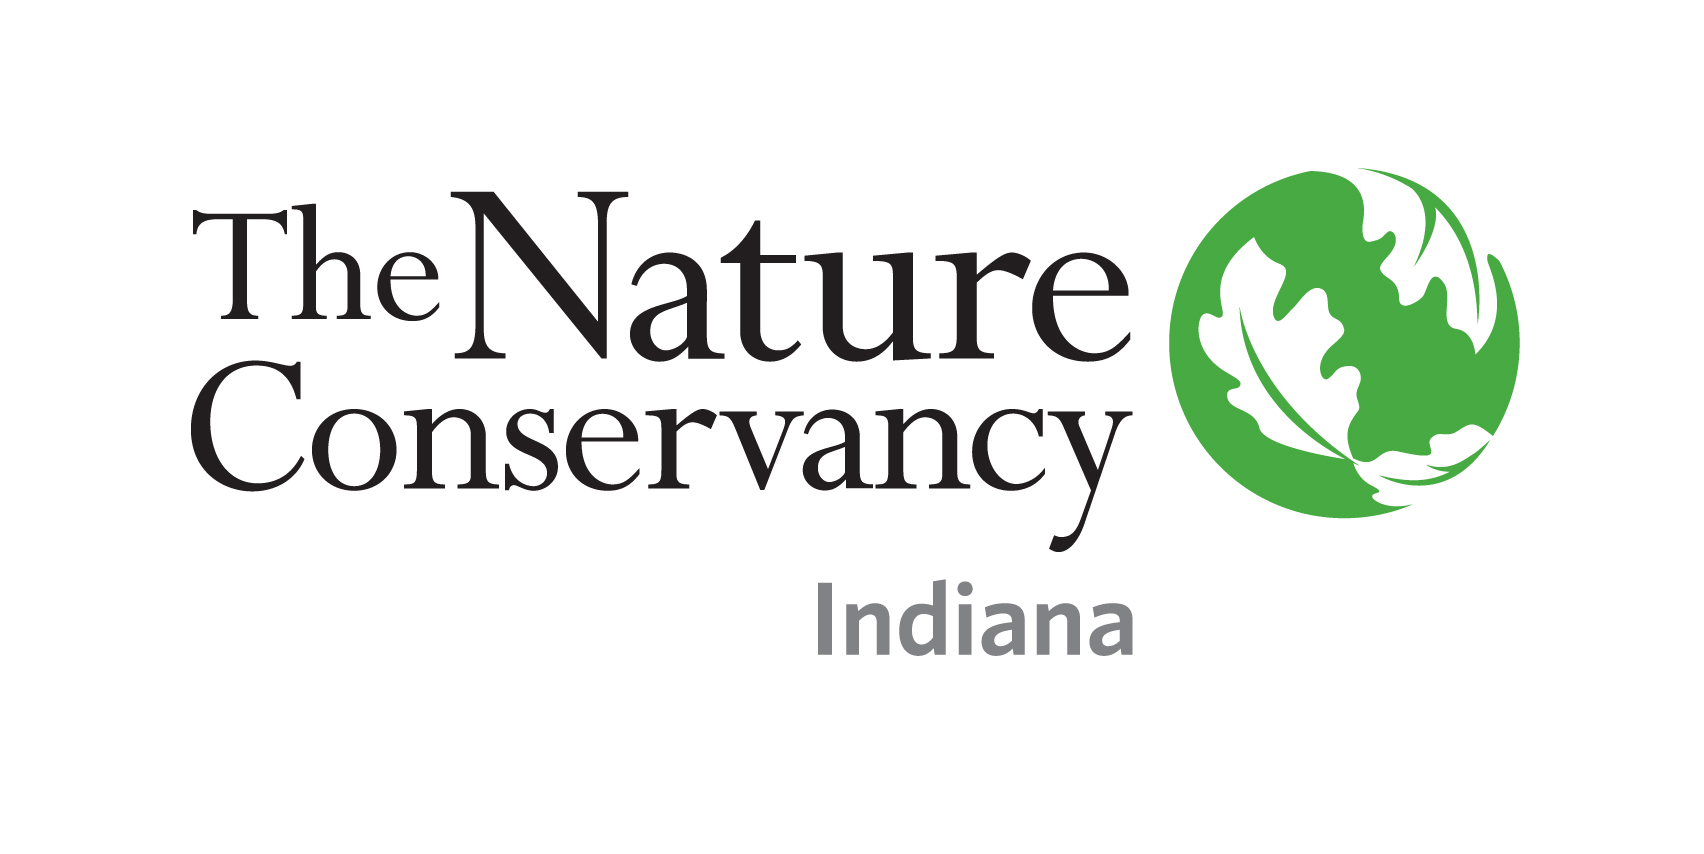 The Nature Conservancy of Indiana seeks a Director of Stewardship